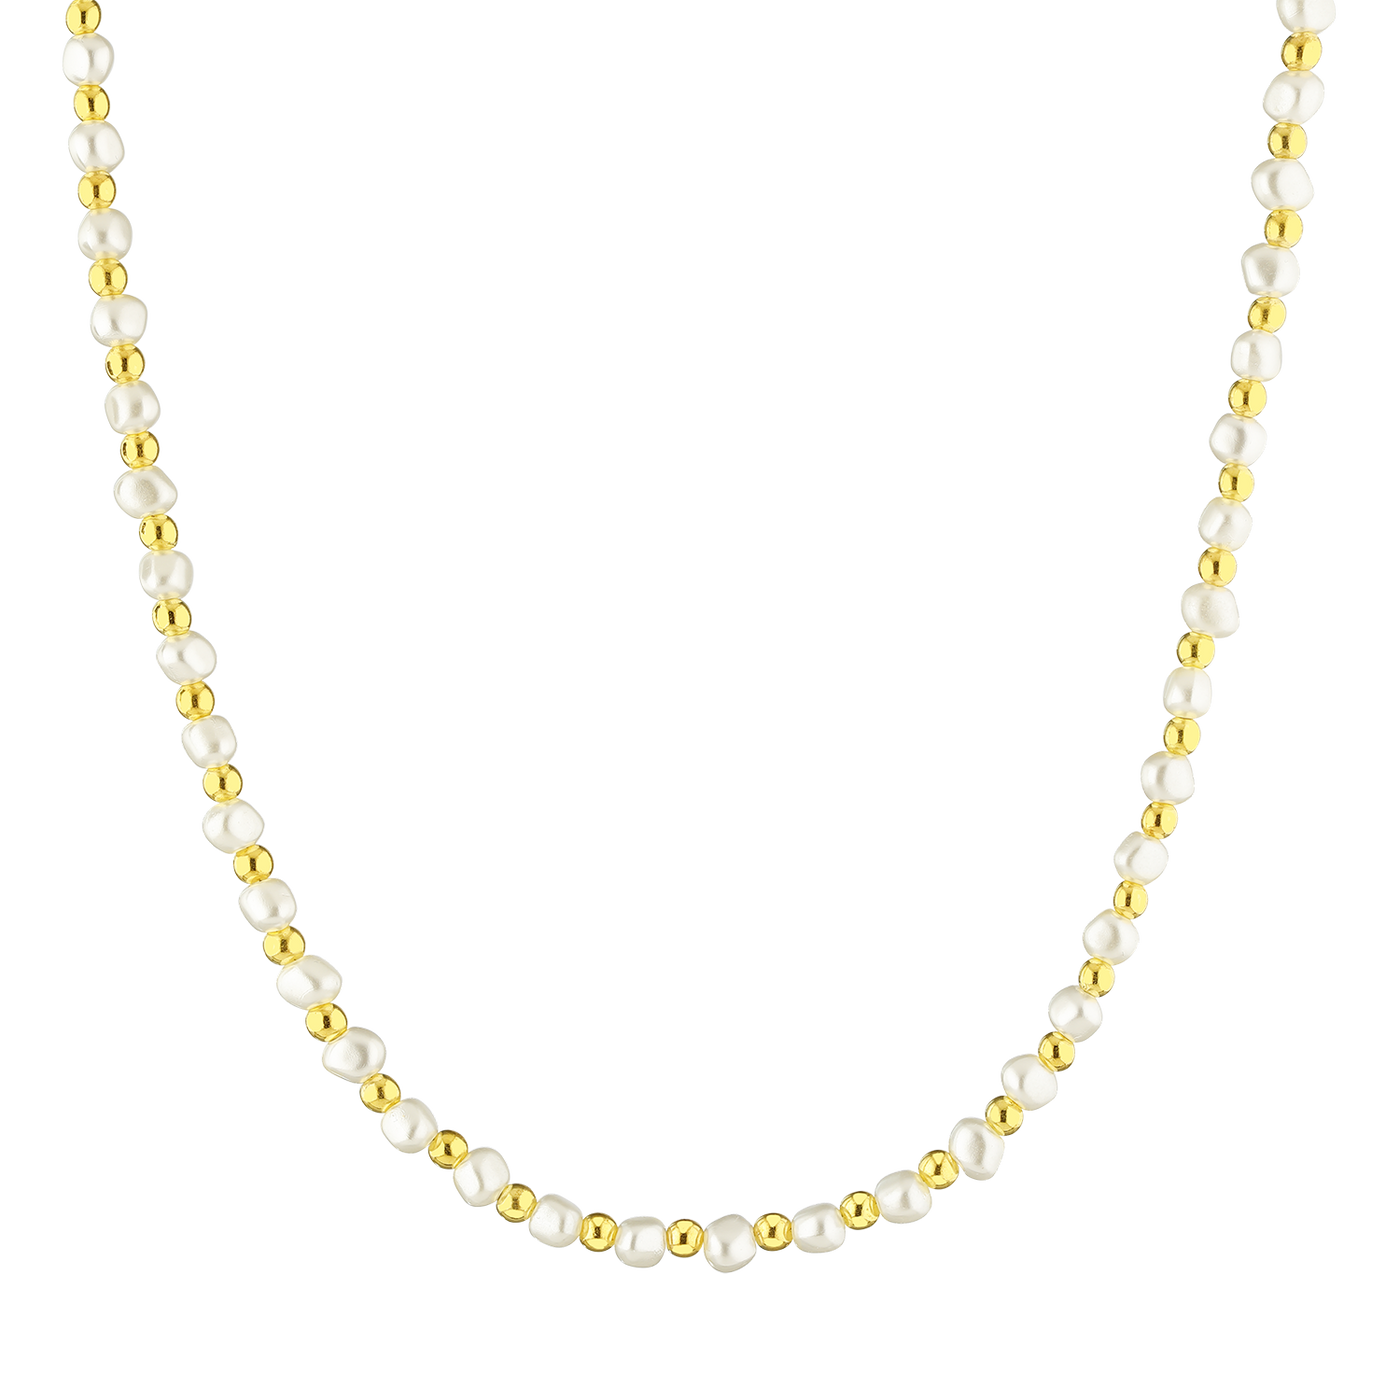 Necklace Golden Pearls